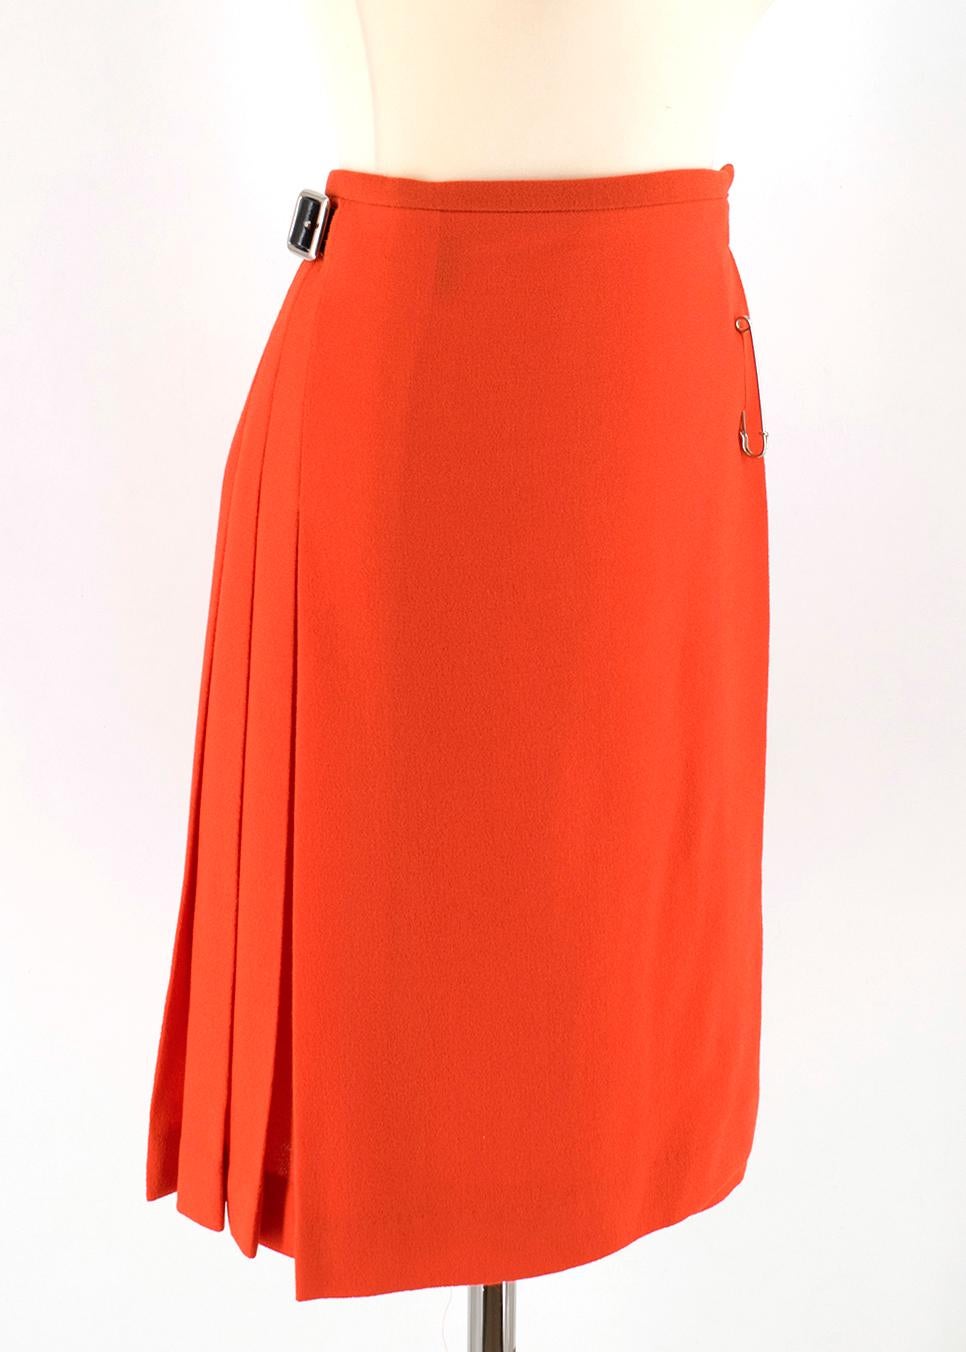 Le Kilt Orange Pleated Wool Skirt

- orange wool skirt 
- wrap style
- leather buckle fastening to the sides
- silver tone hardware
- pleated to the back
- large pin embellishment

Please note, these items are pre-owned and may show some signs of